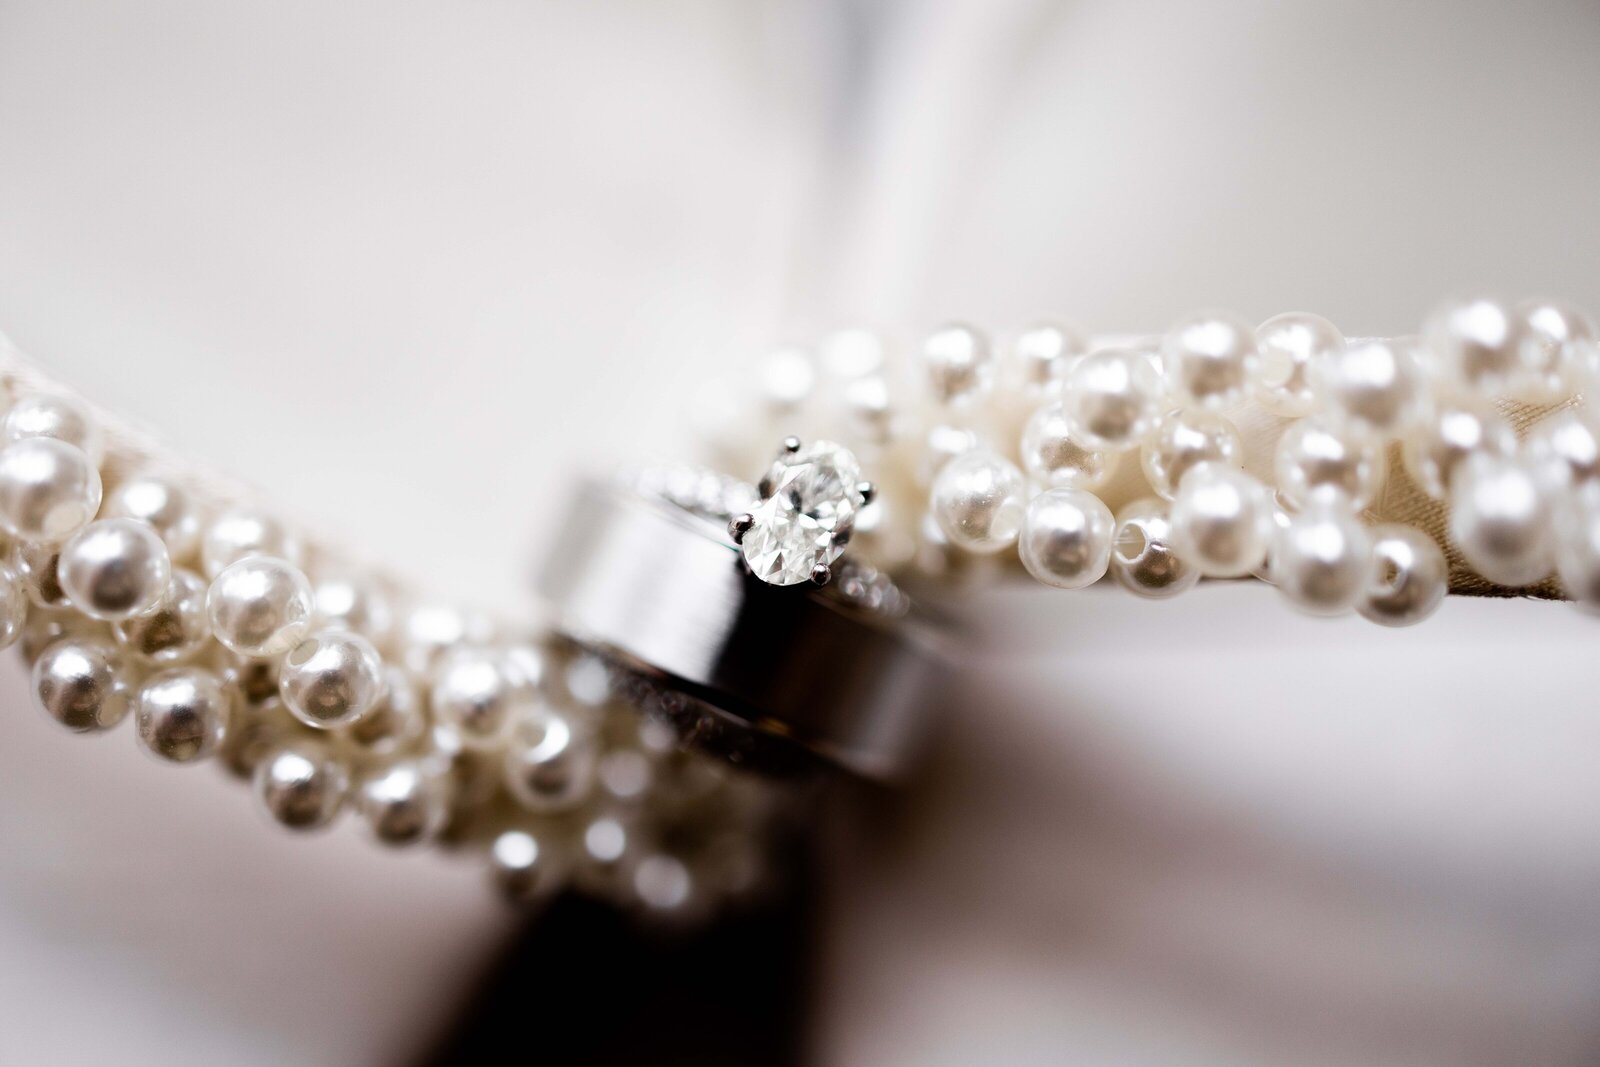 Dive into the exquisite details of wedding day elegance with this stunning image featuring a close-up of a sparkling engagement ring, sleek wedding bands, and pearl-covered bridal shoes. Perfectly arranged, this photograph captures the harmony and meticulous craftsmanship of each element, highlighting the thoughtful coordination that complements the bride's ensemble. Ideal for future brides and wedding planners seeking inspiration for luxurious and detailed accessory choices that add a touch of sophistication to any wedding theme.